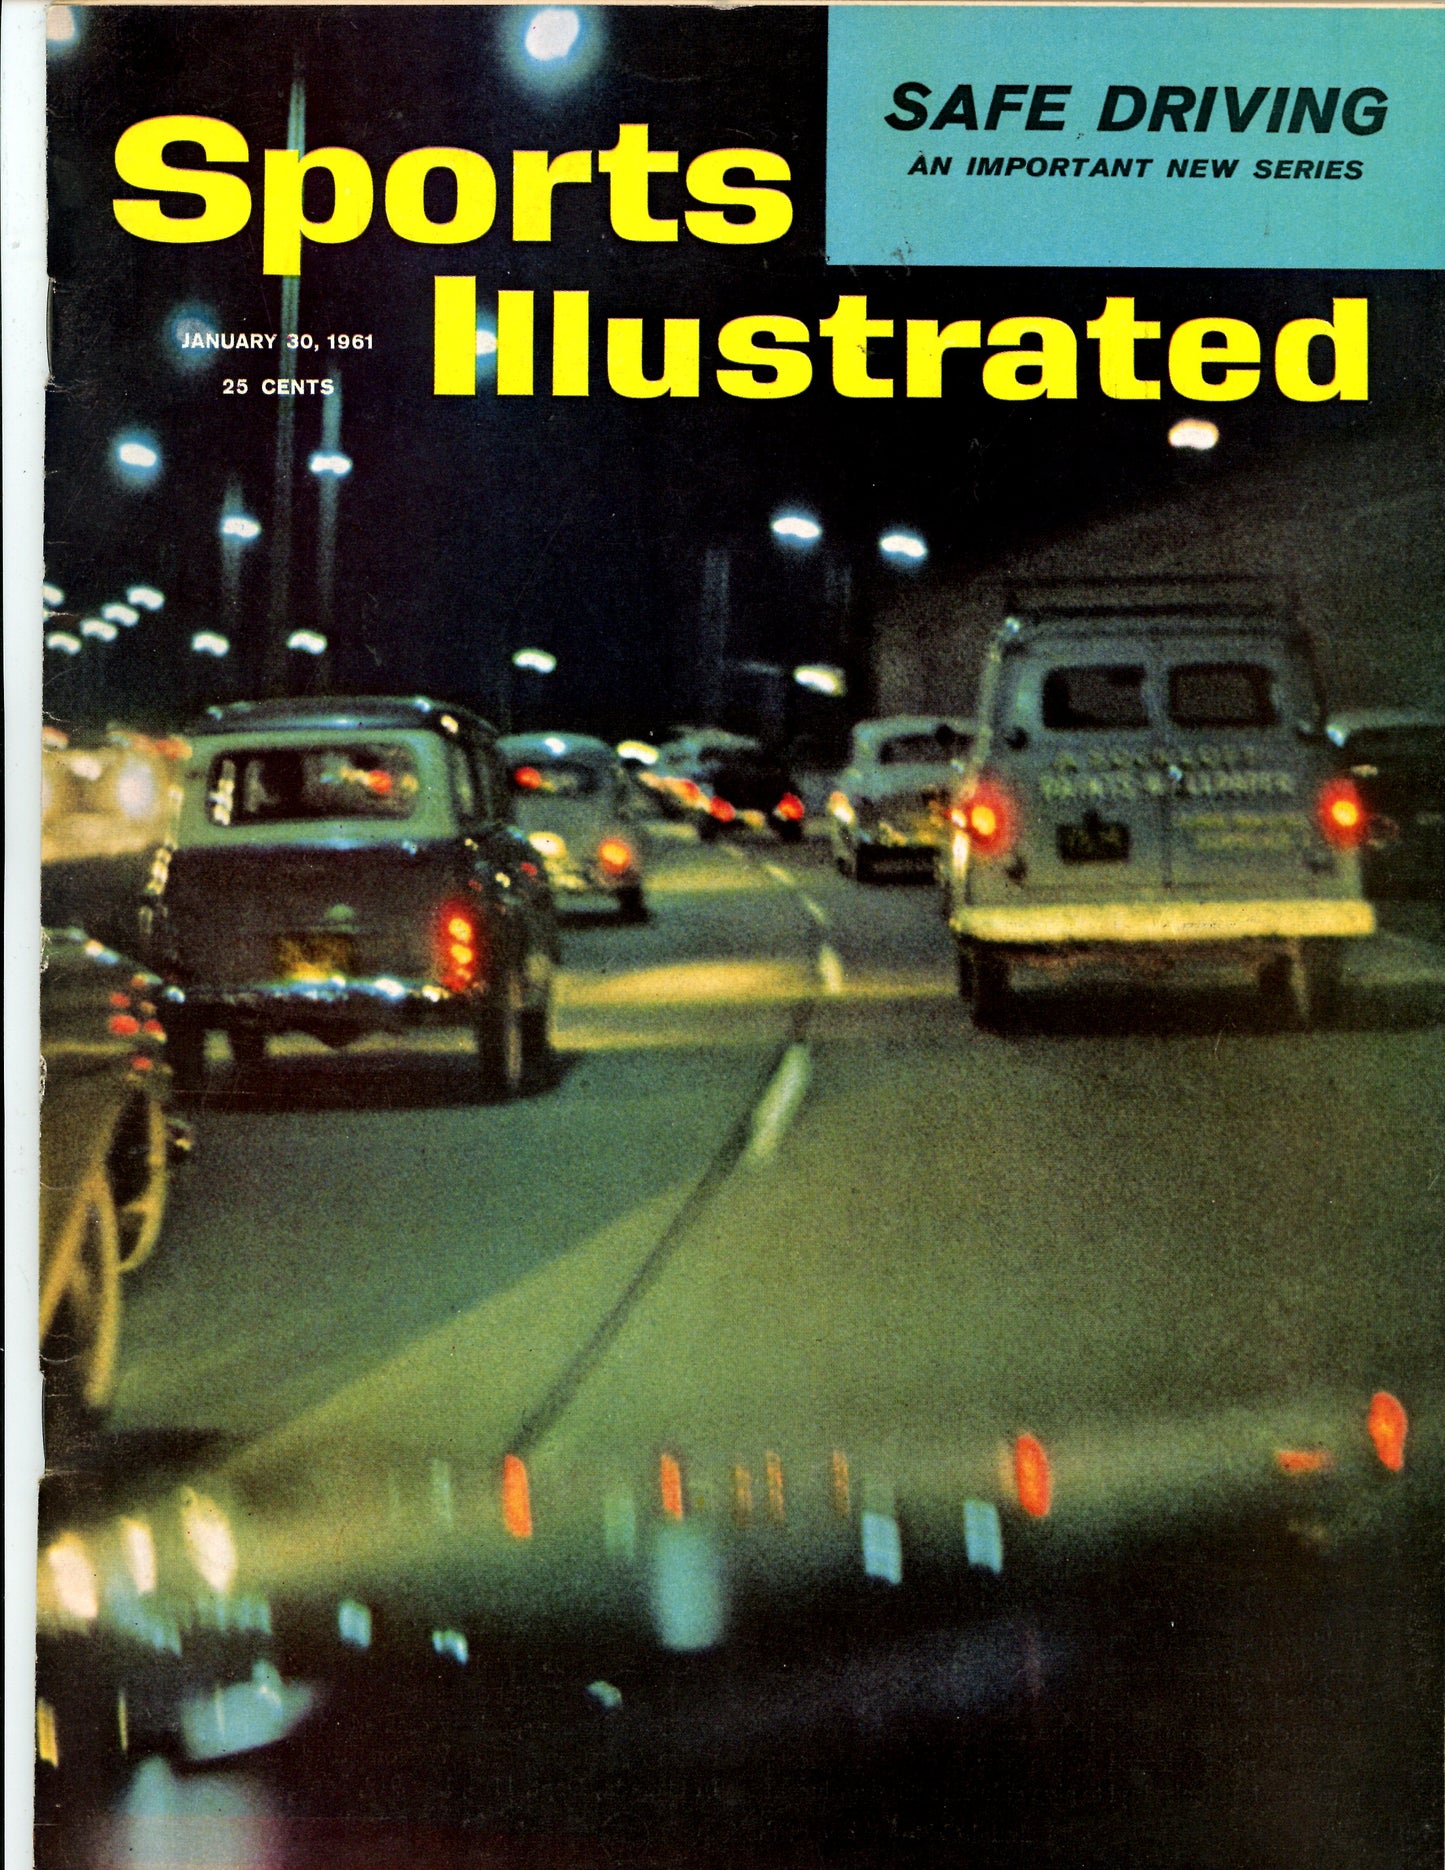 Sports Illustrated Vintage Magazine Rare Newsstand Edition (January 30, 1961) Safe Driving